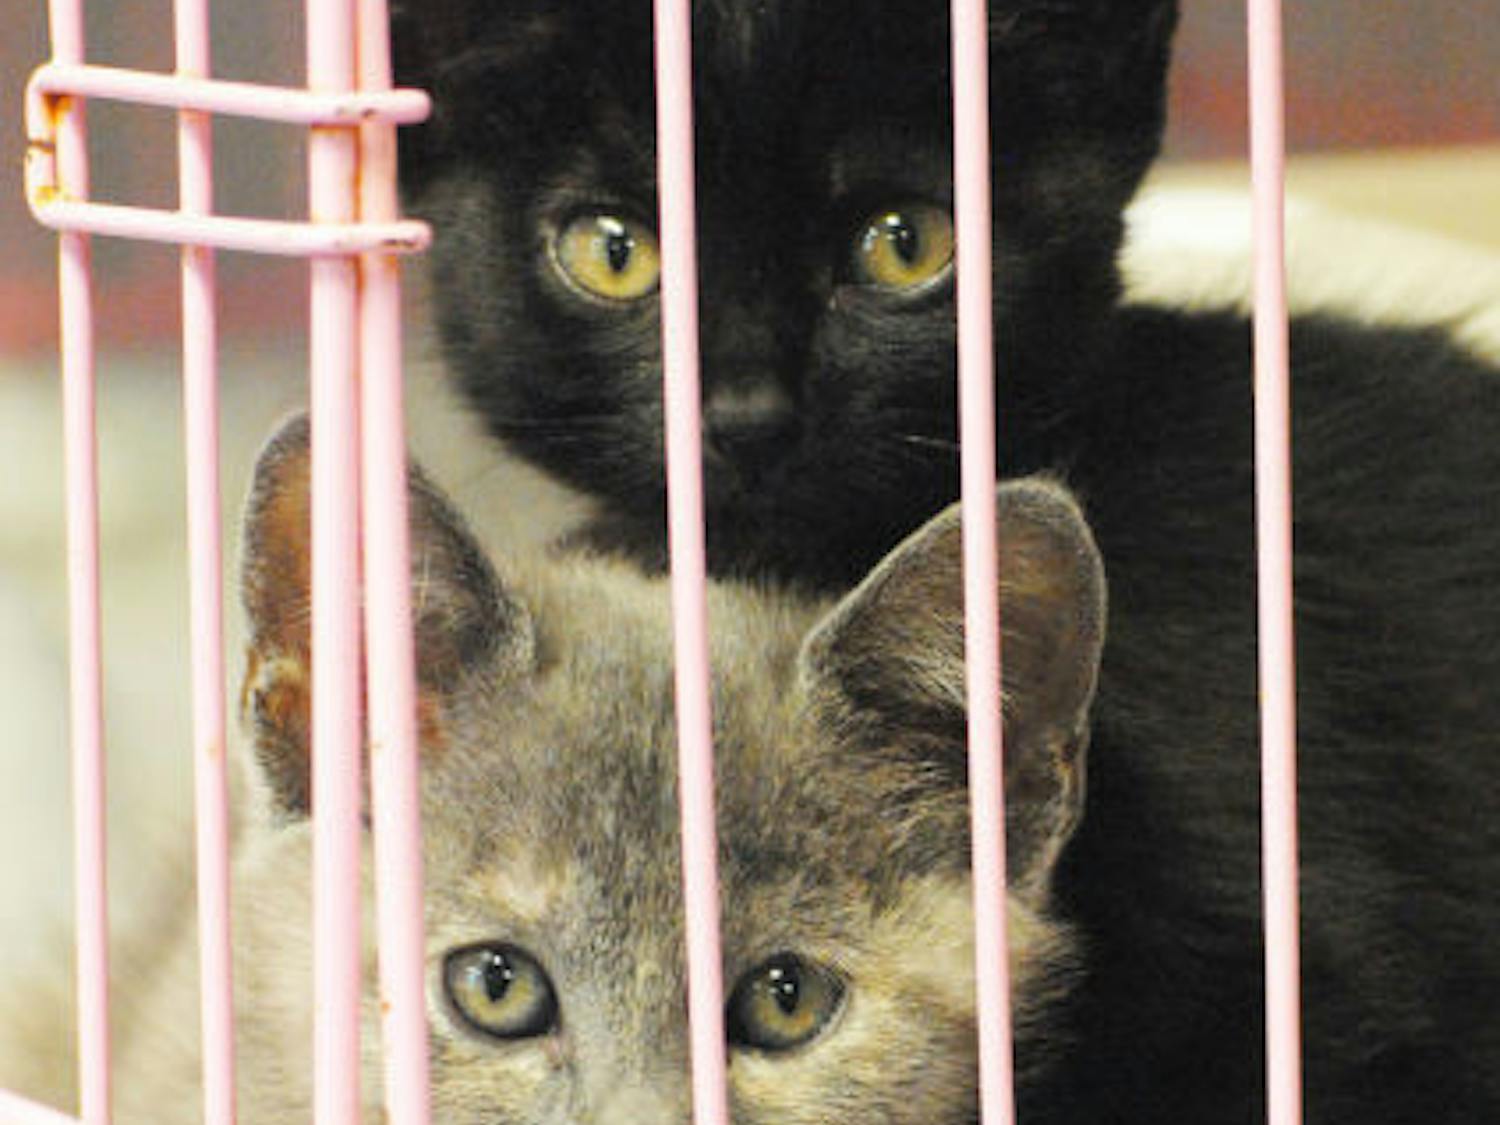 Two kittens sit in a cage at the Alachua County Humane Society on September 10, 2013.